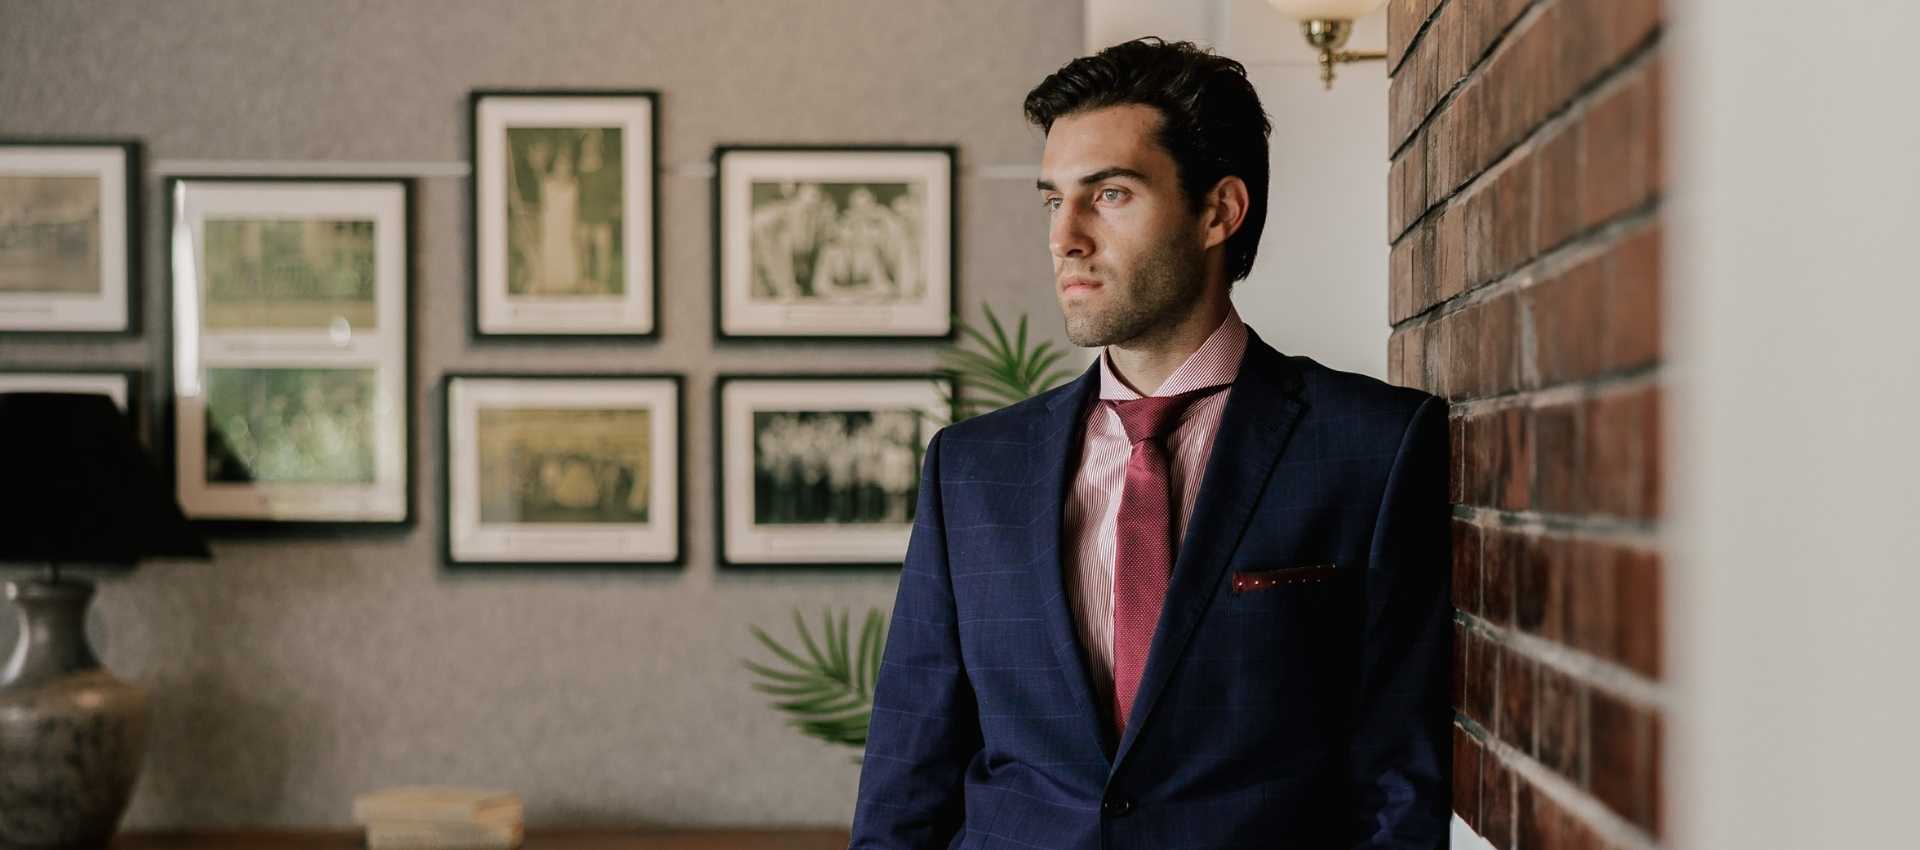 All Dress Shirts for Men from Dandy & Son. Image of man wearing a Extreme Cutaway Collar Shirt for Dandy & Son